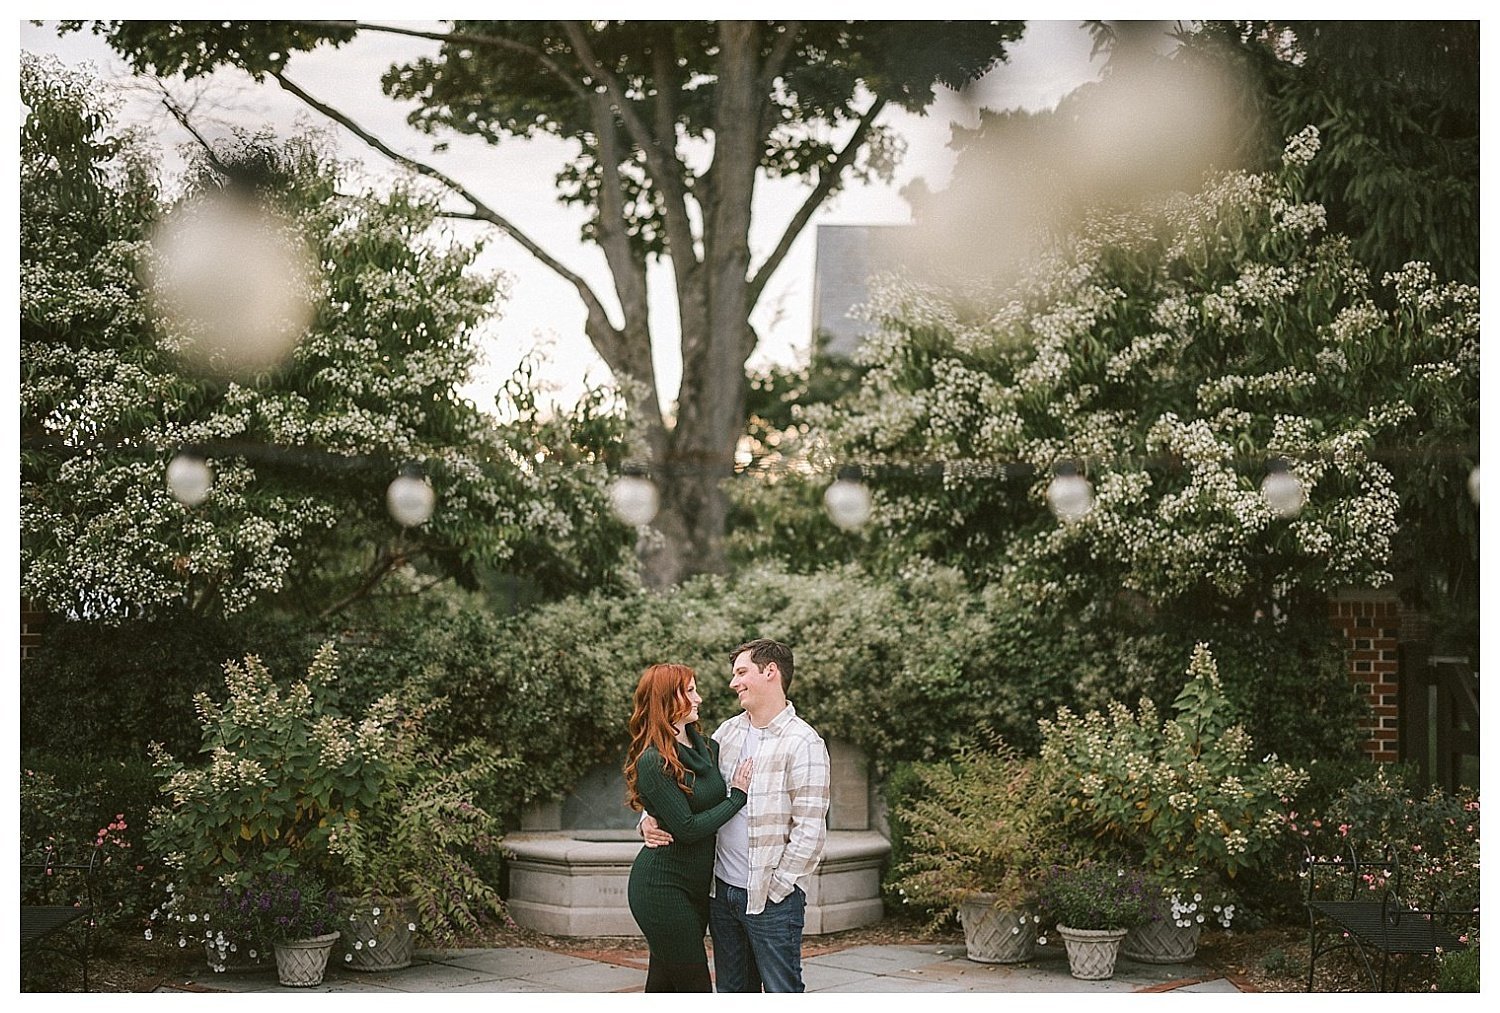 Beautiful Engagement Photo at Franklin Park Conservatory